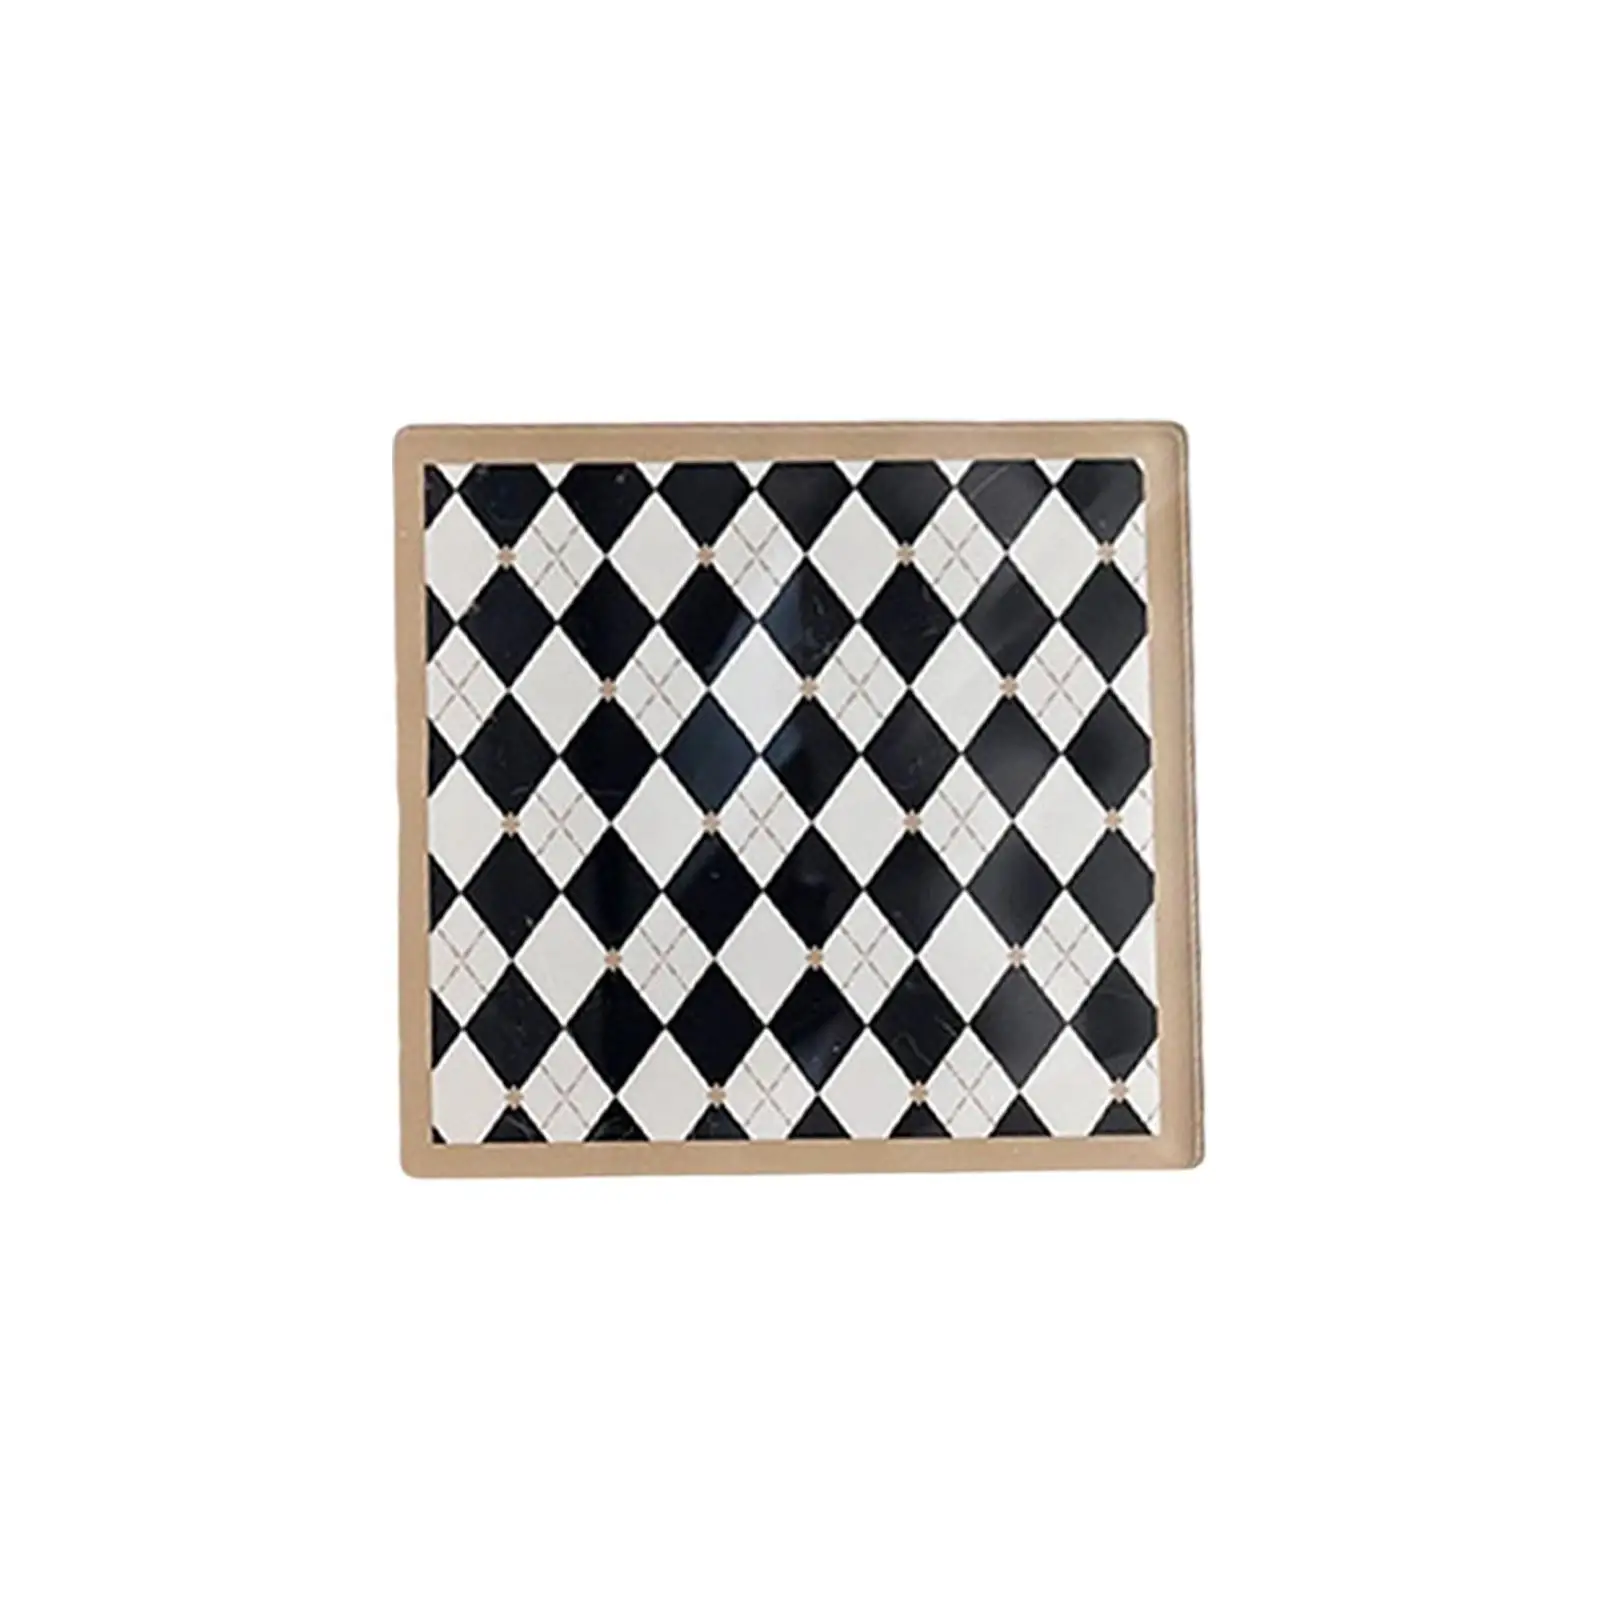 Acrylic Checkerboard Drinks Coaster Home Decoration Cup Holder Placemat Desk